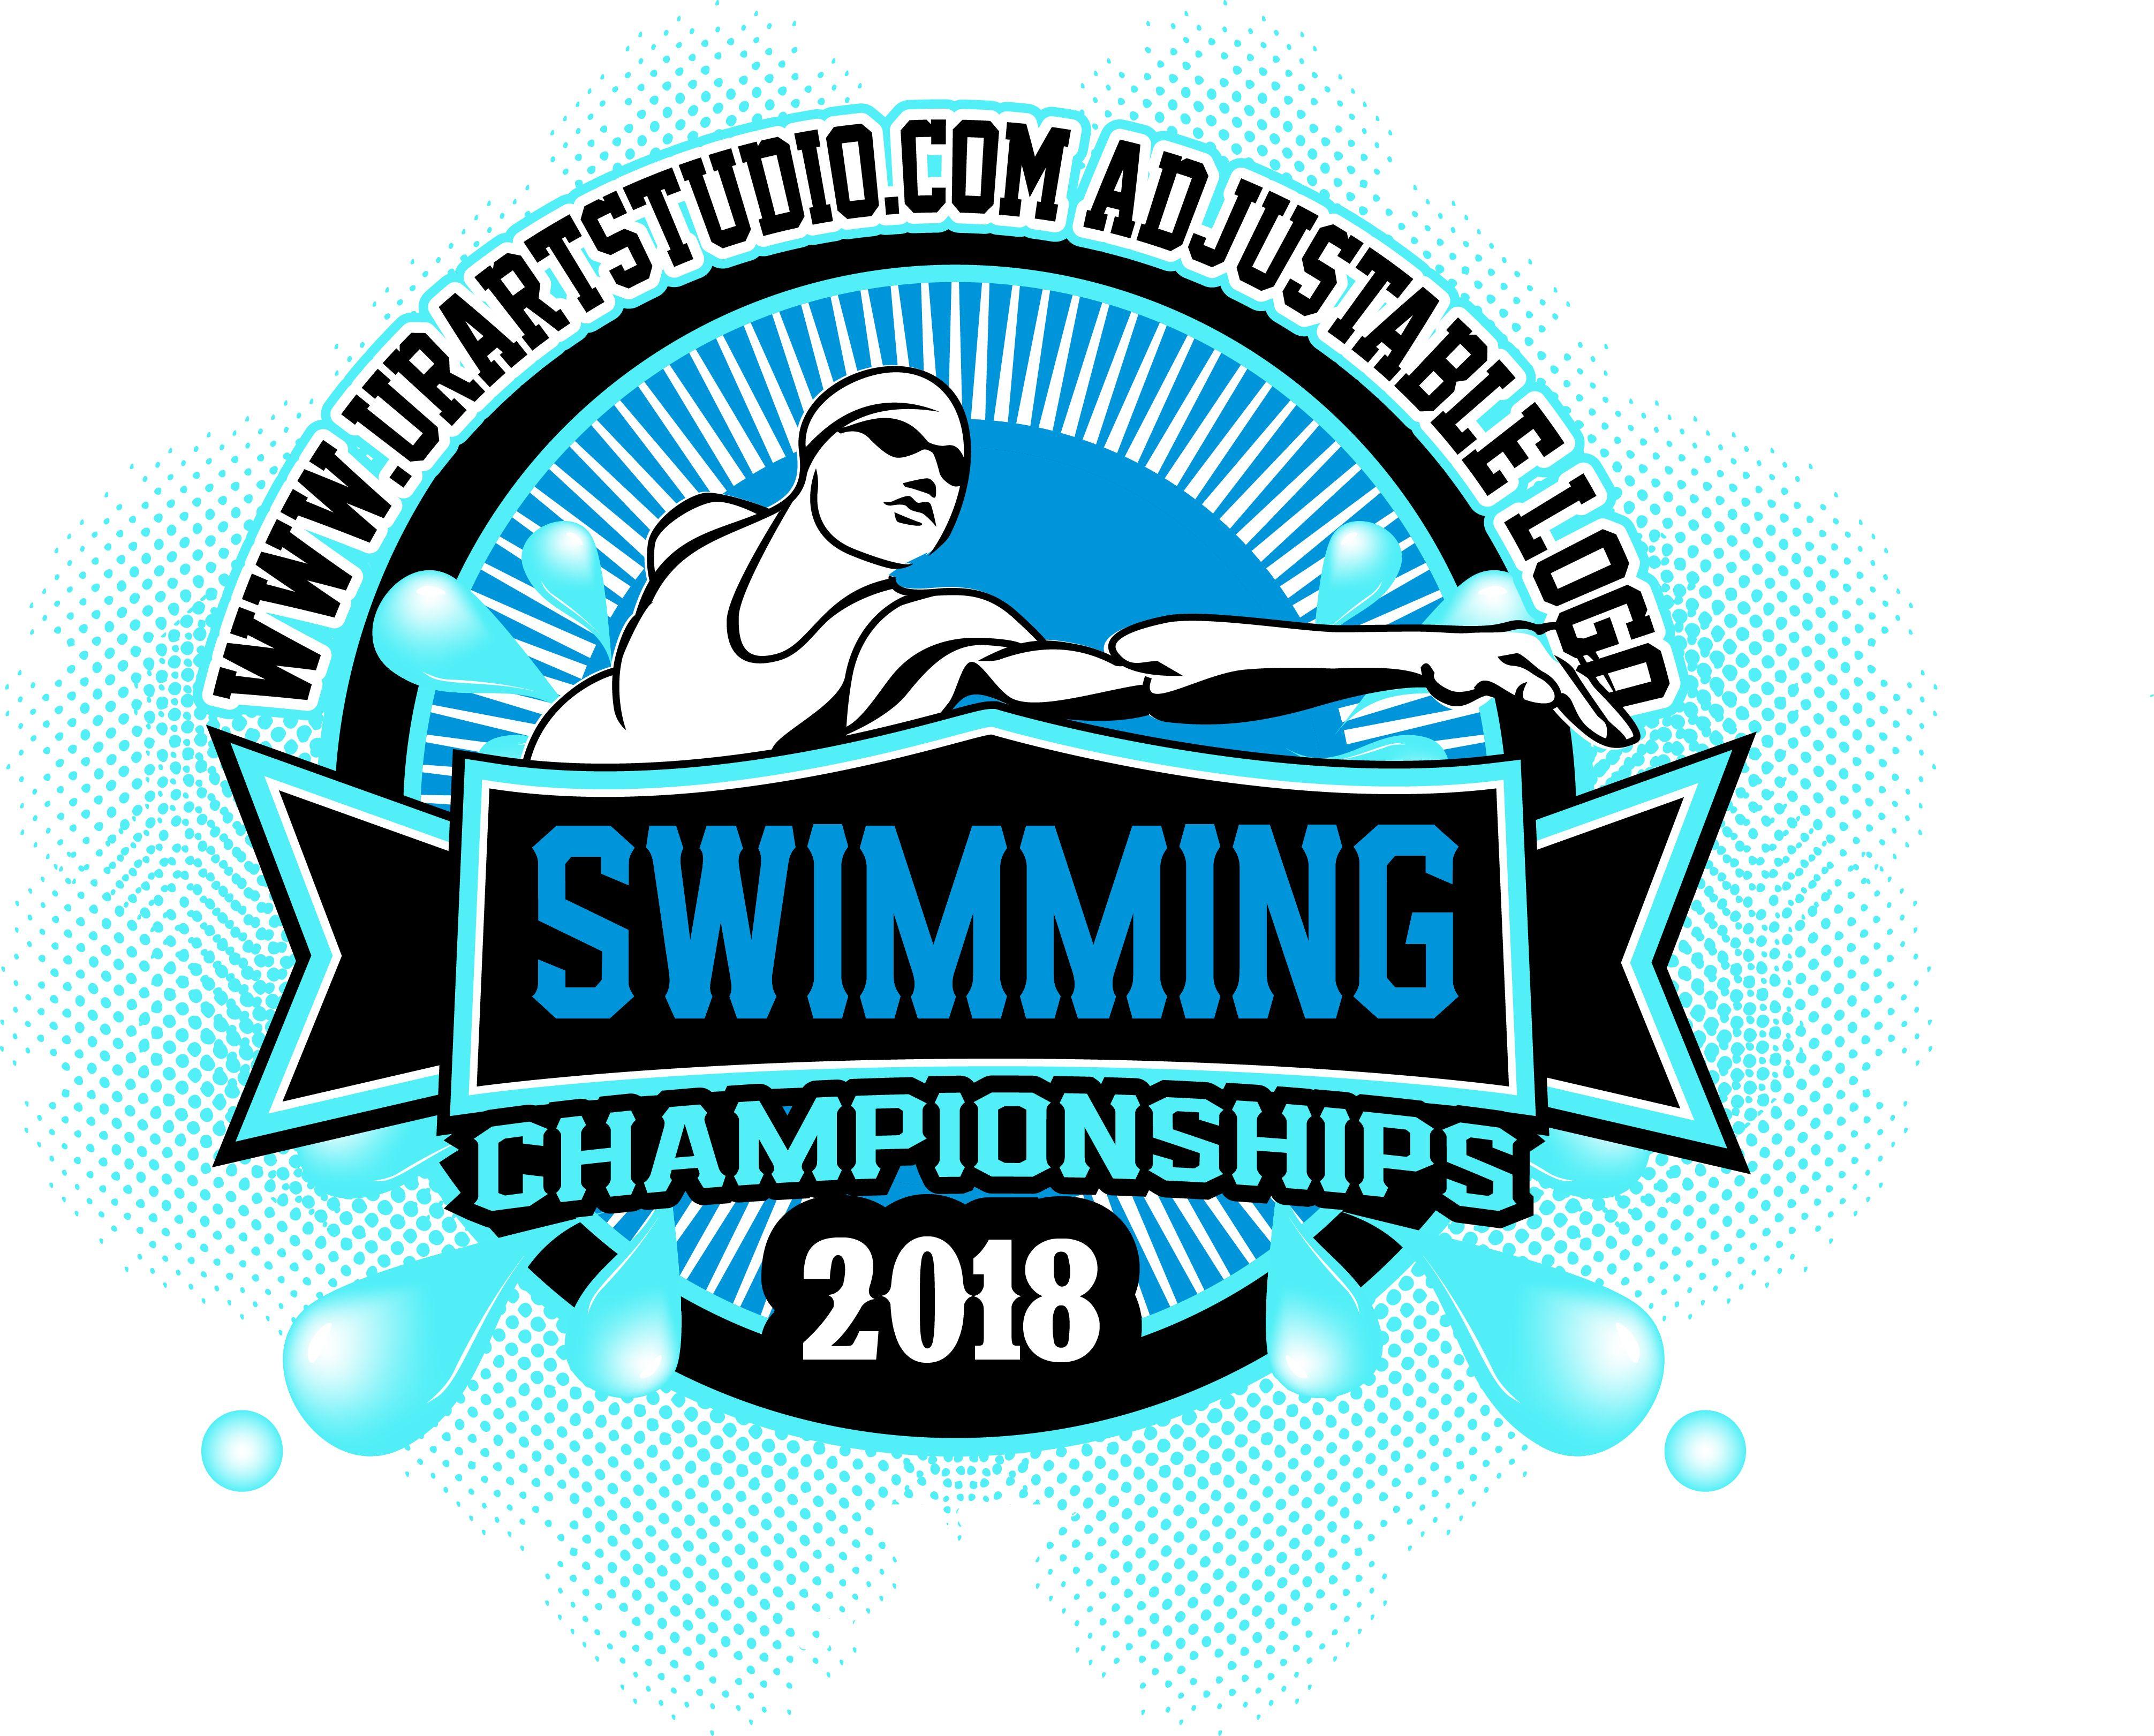 Swimming Logo - COLOR SEPARATED SWIMMING CHAMPIONSHIPS 2018 T-shirt vector logo design for  print